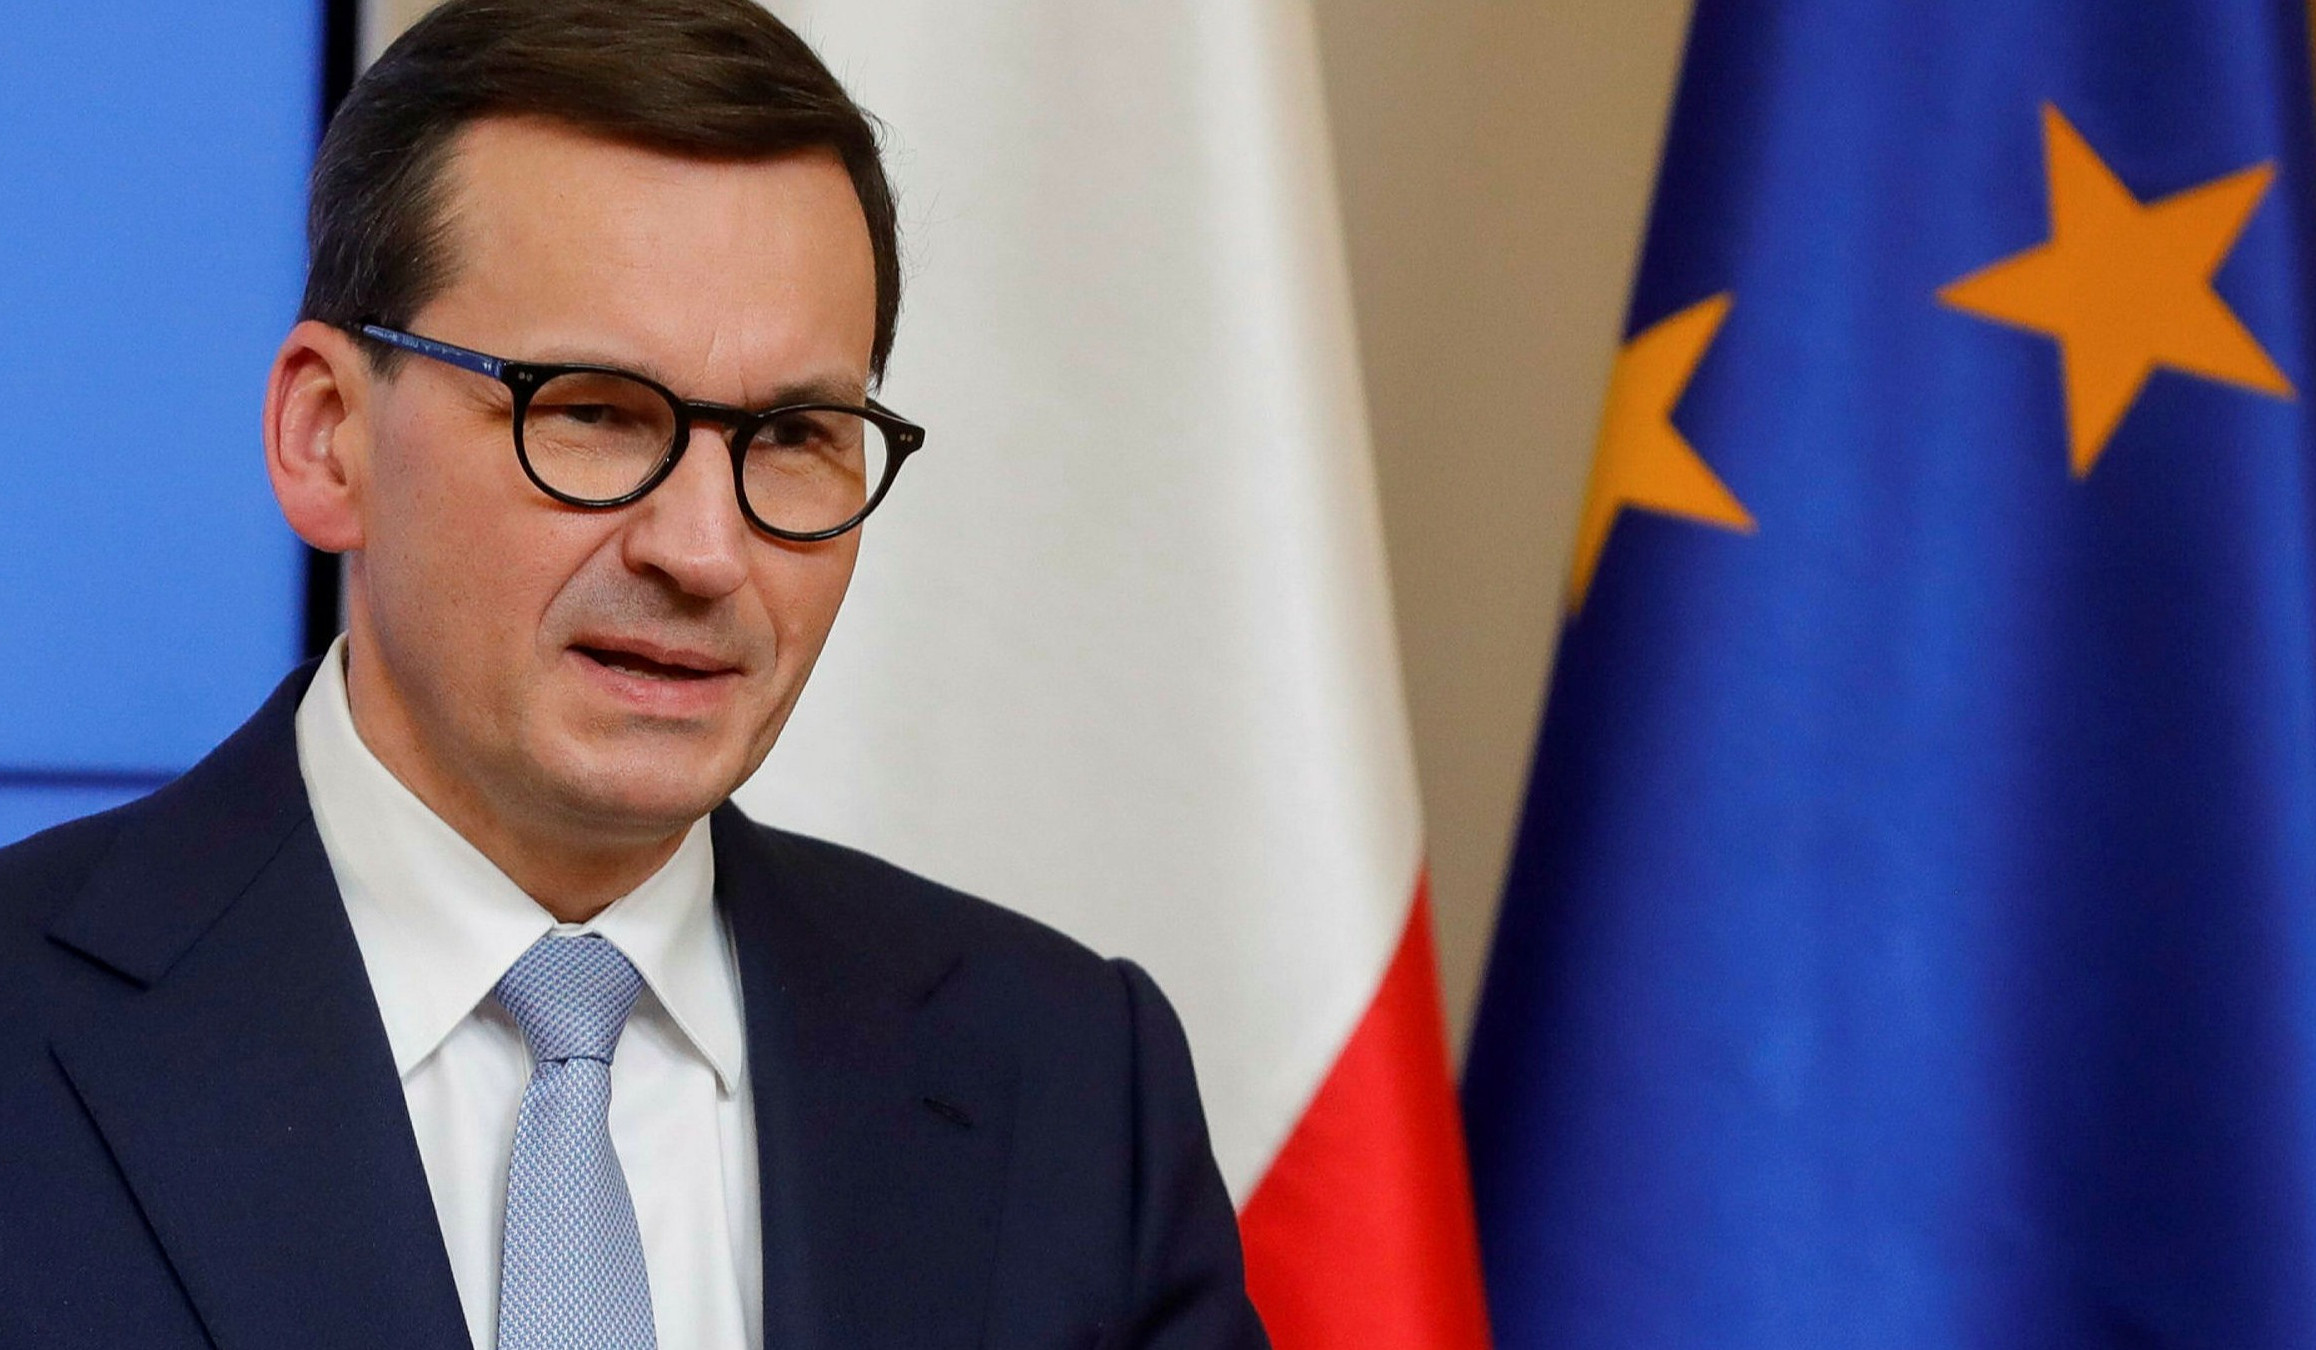 Prime Minister of Poland will visit number of EU countries amid migration crisis